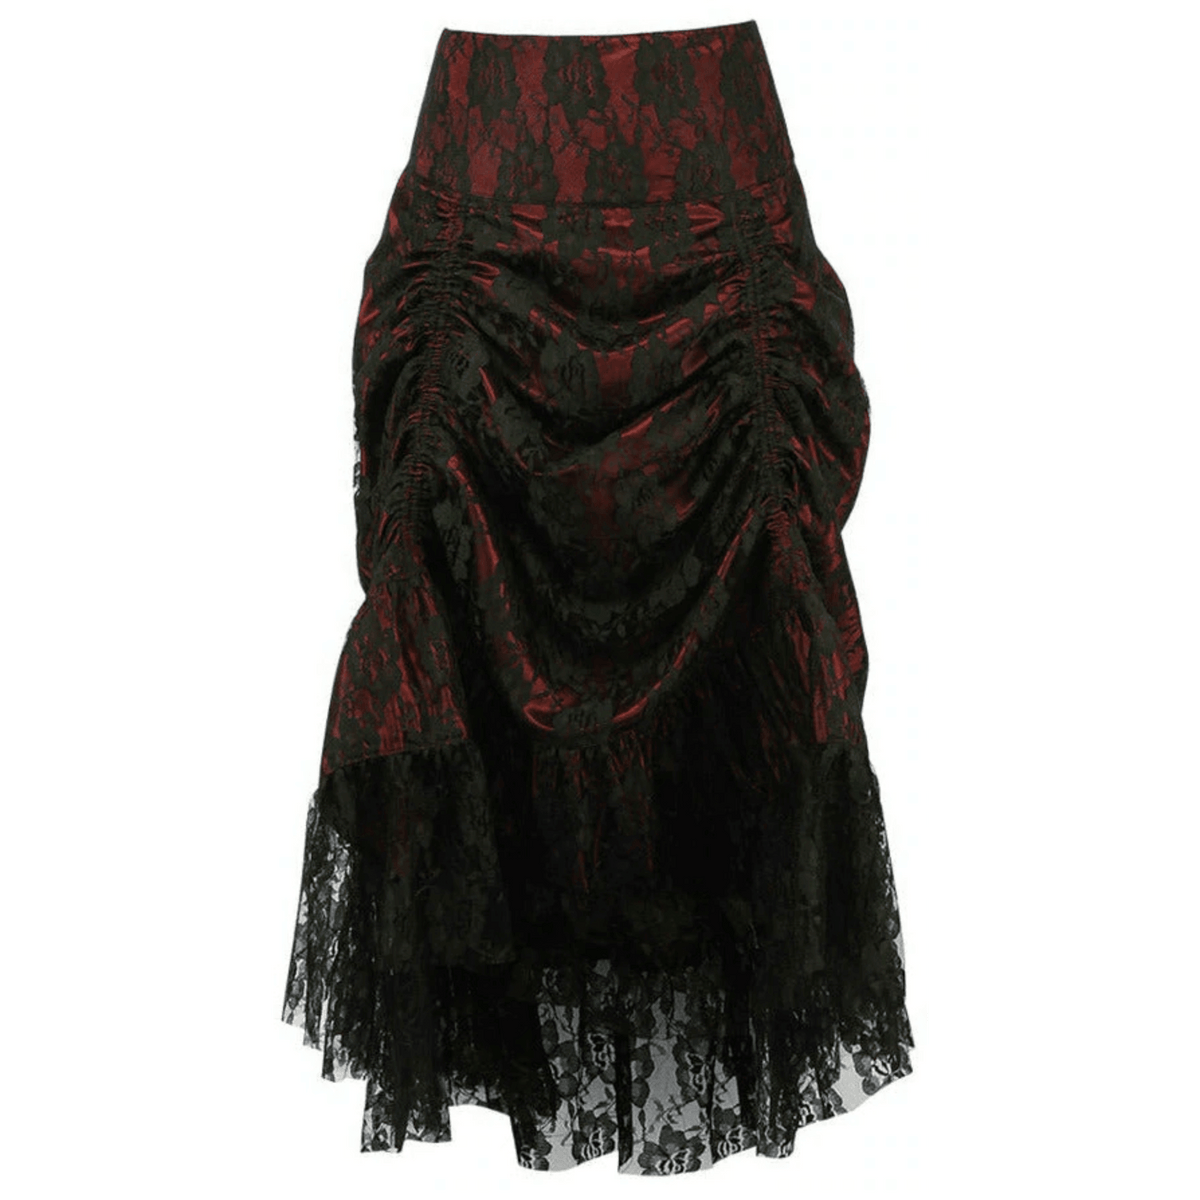 Black Lace Ruched Bustle Skirt